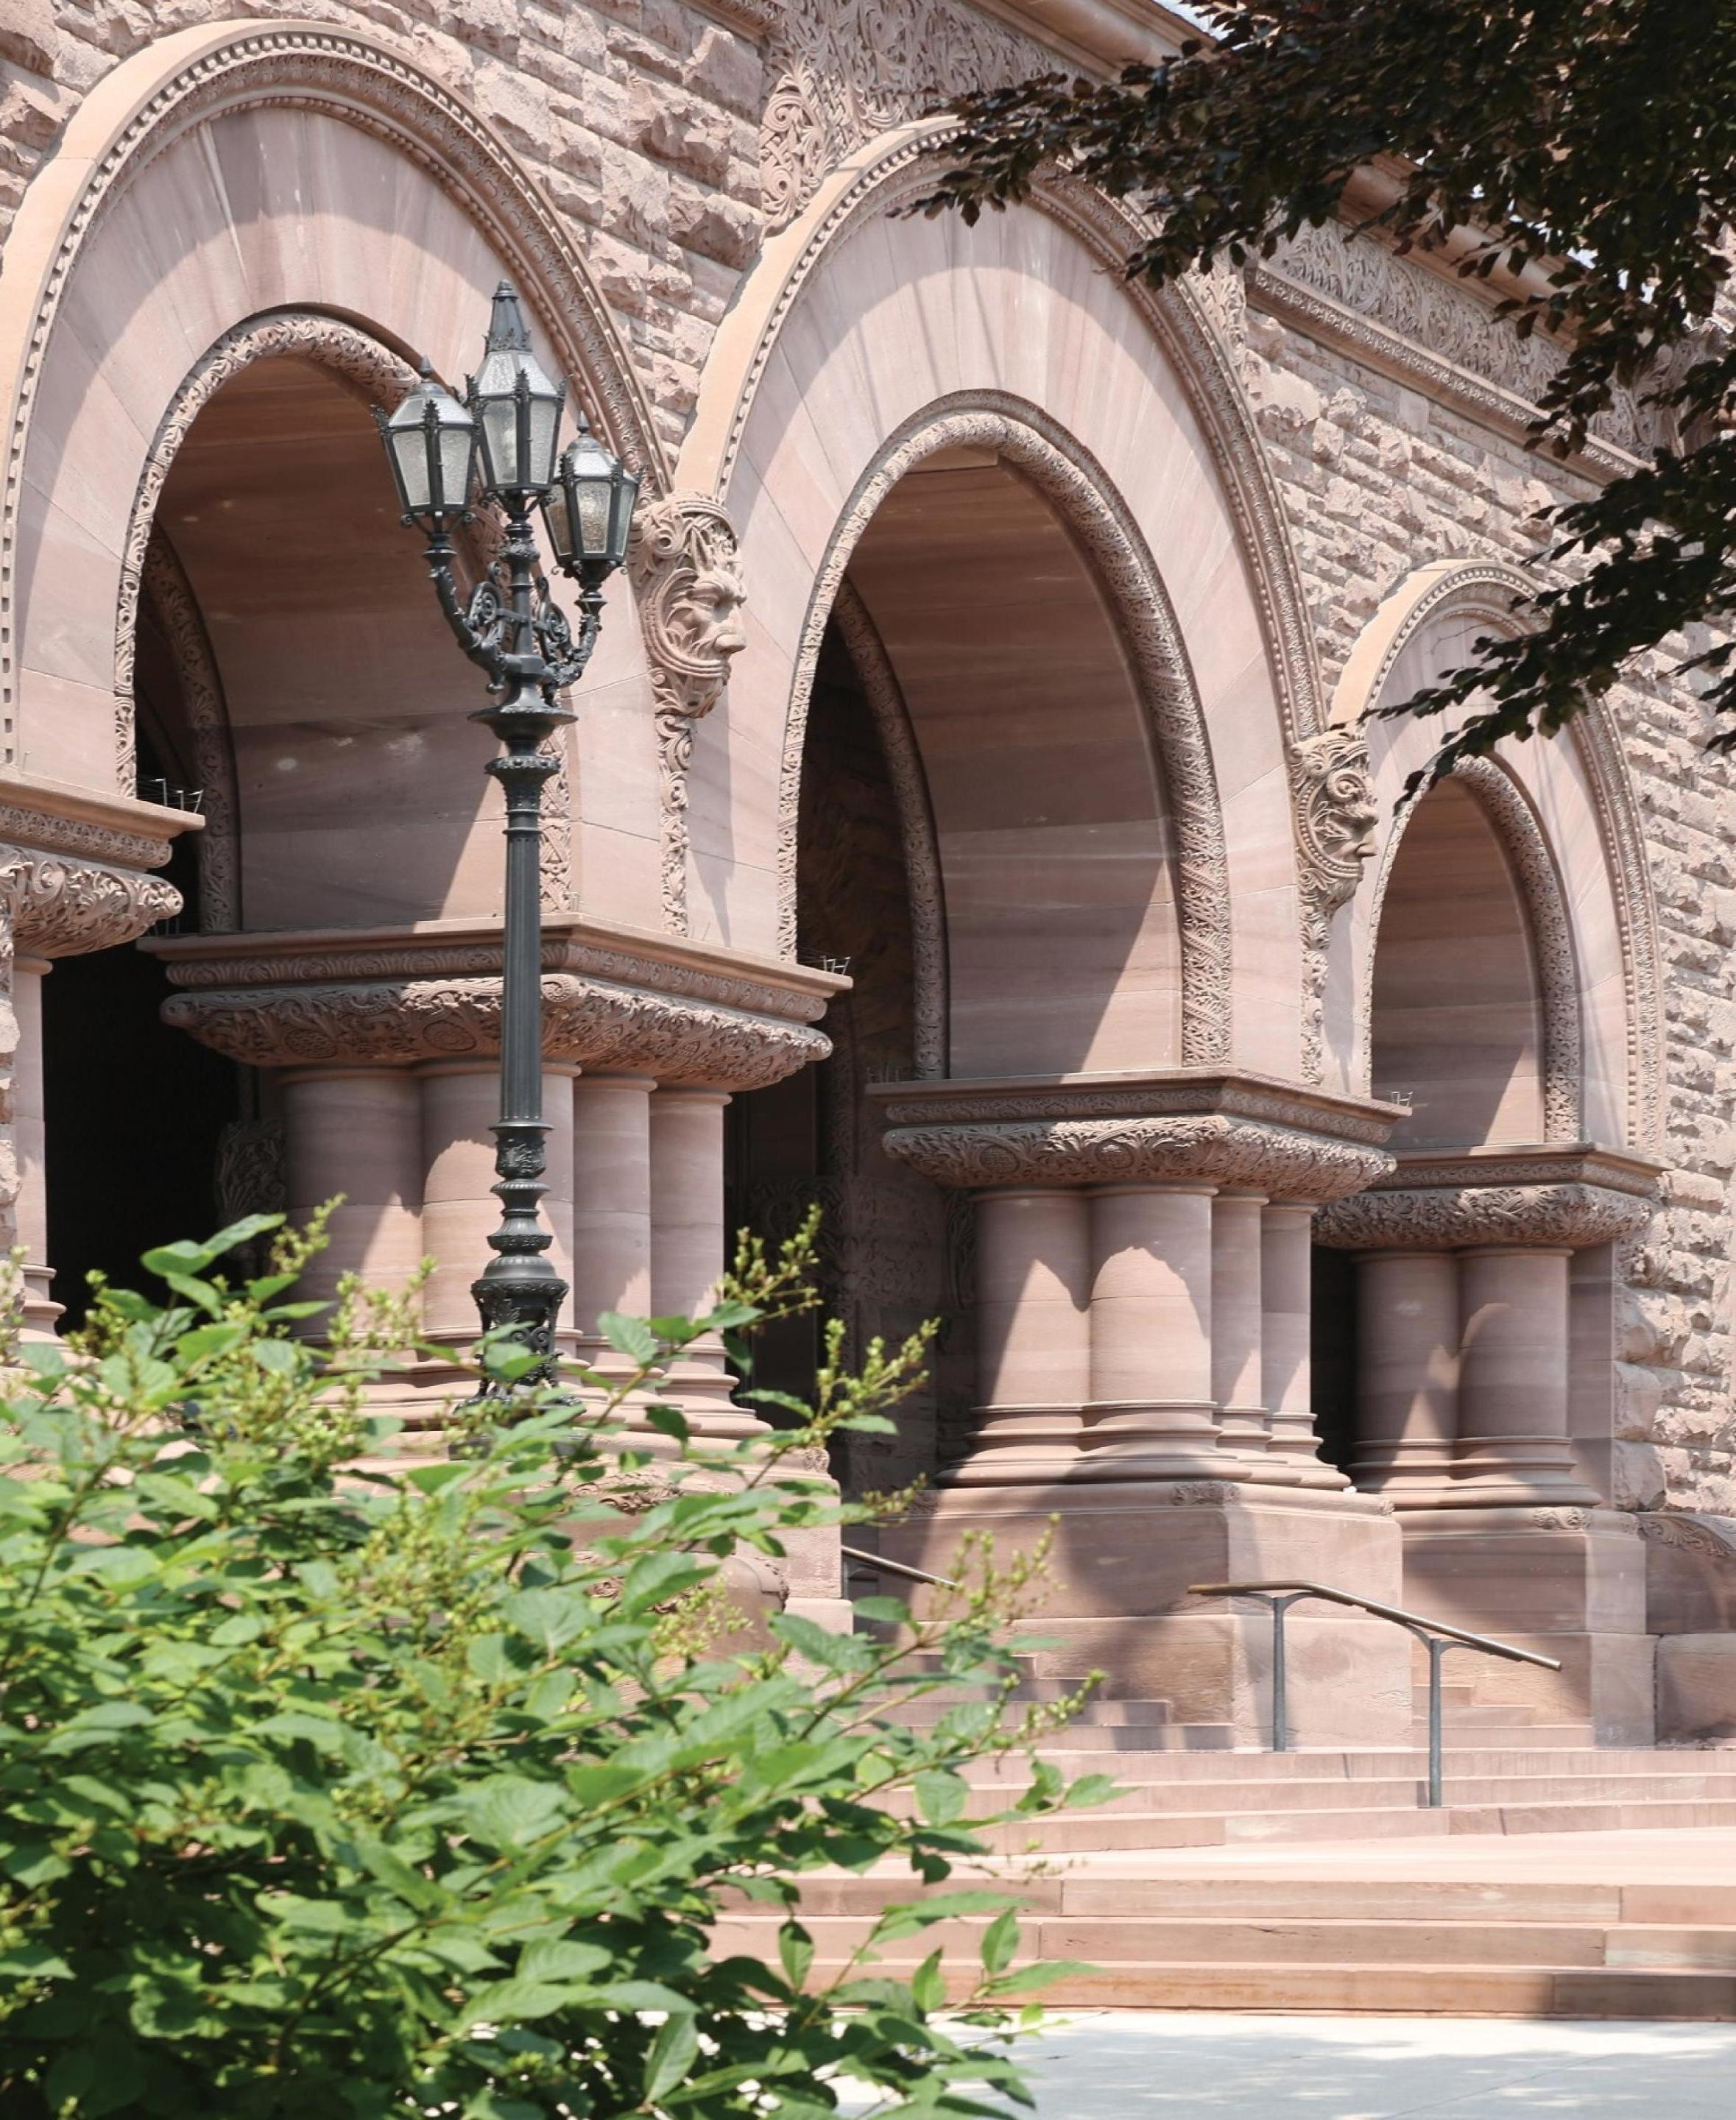 Picture showing the front entrance arches at Ontario's Legislative Building